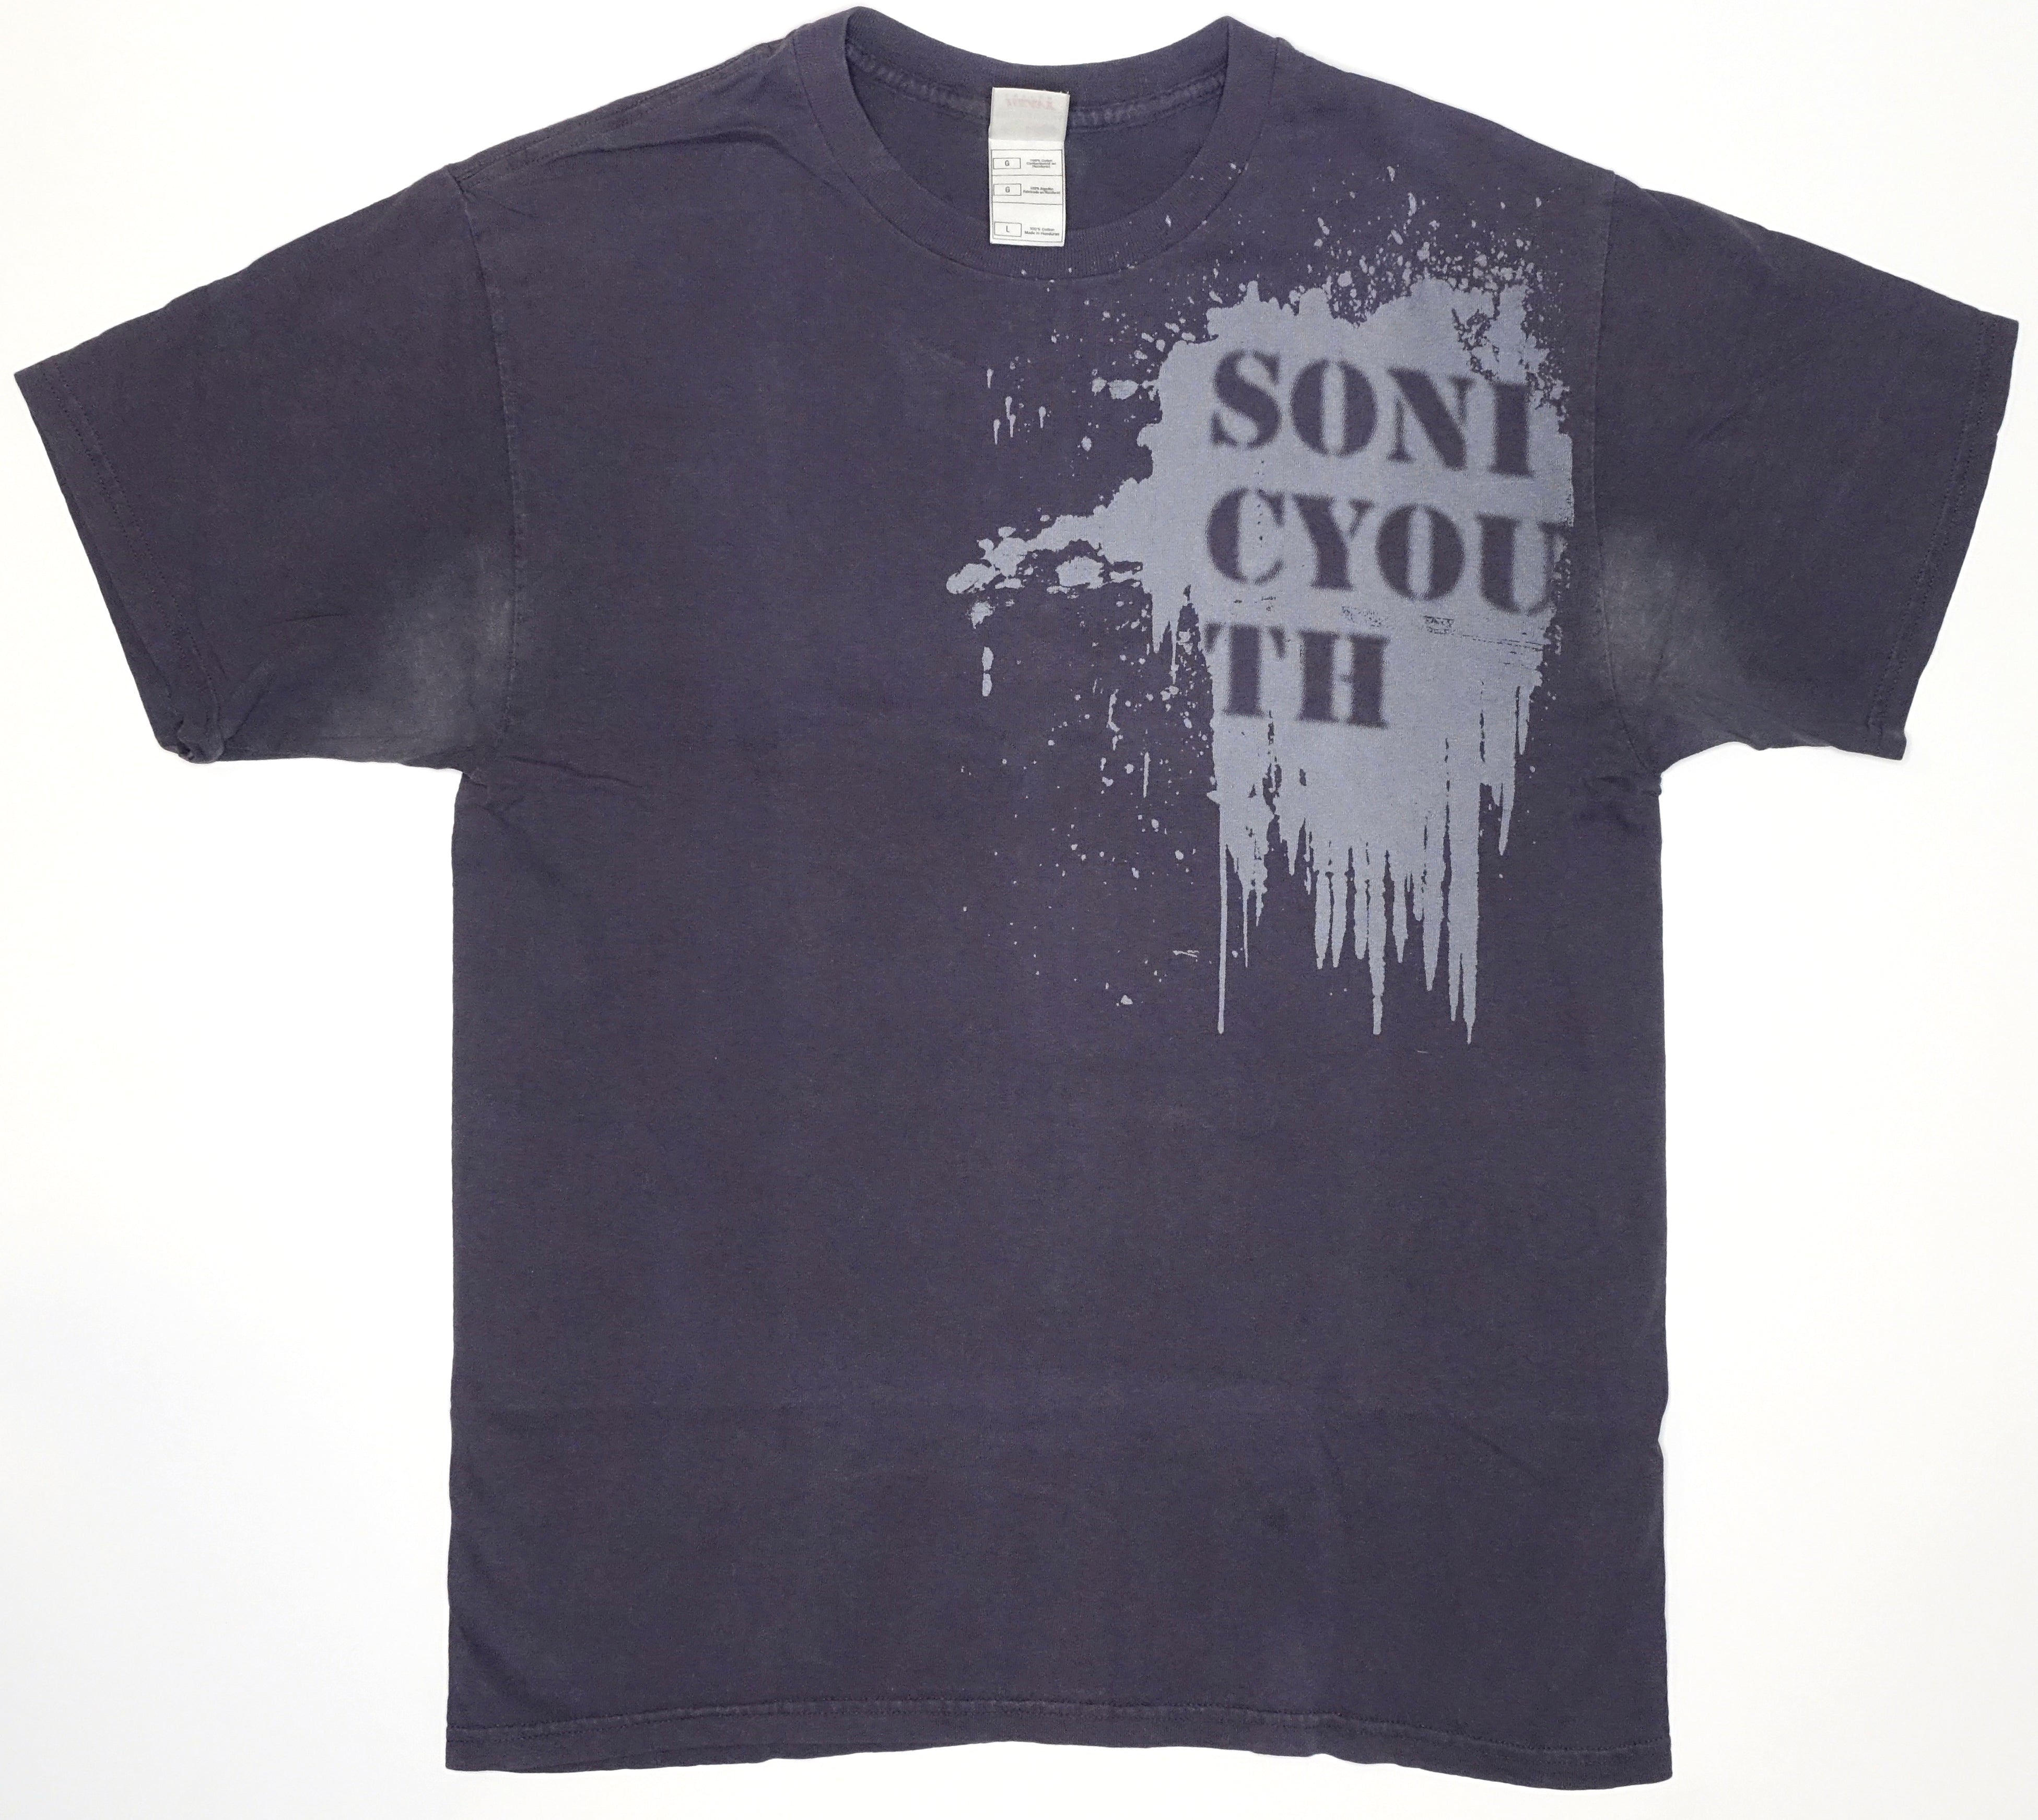 Sonic Youth - Rather Ripped Tour Shirt Size Large